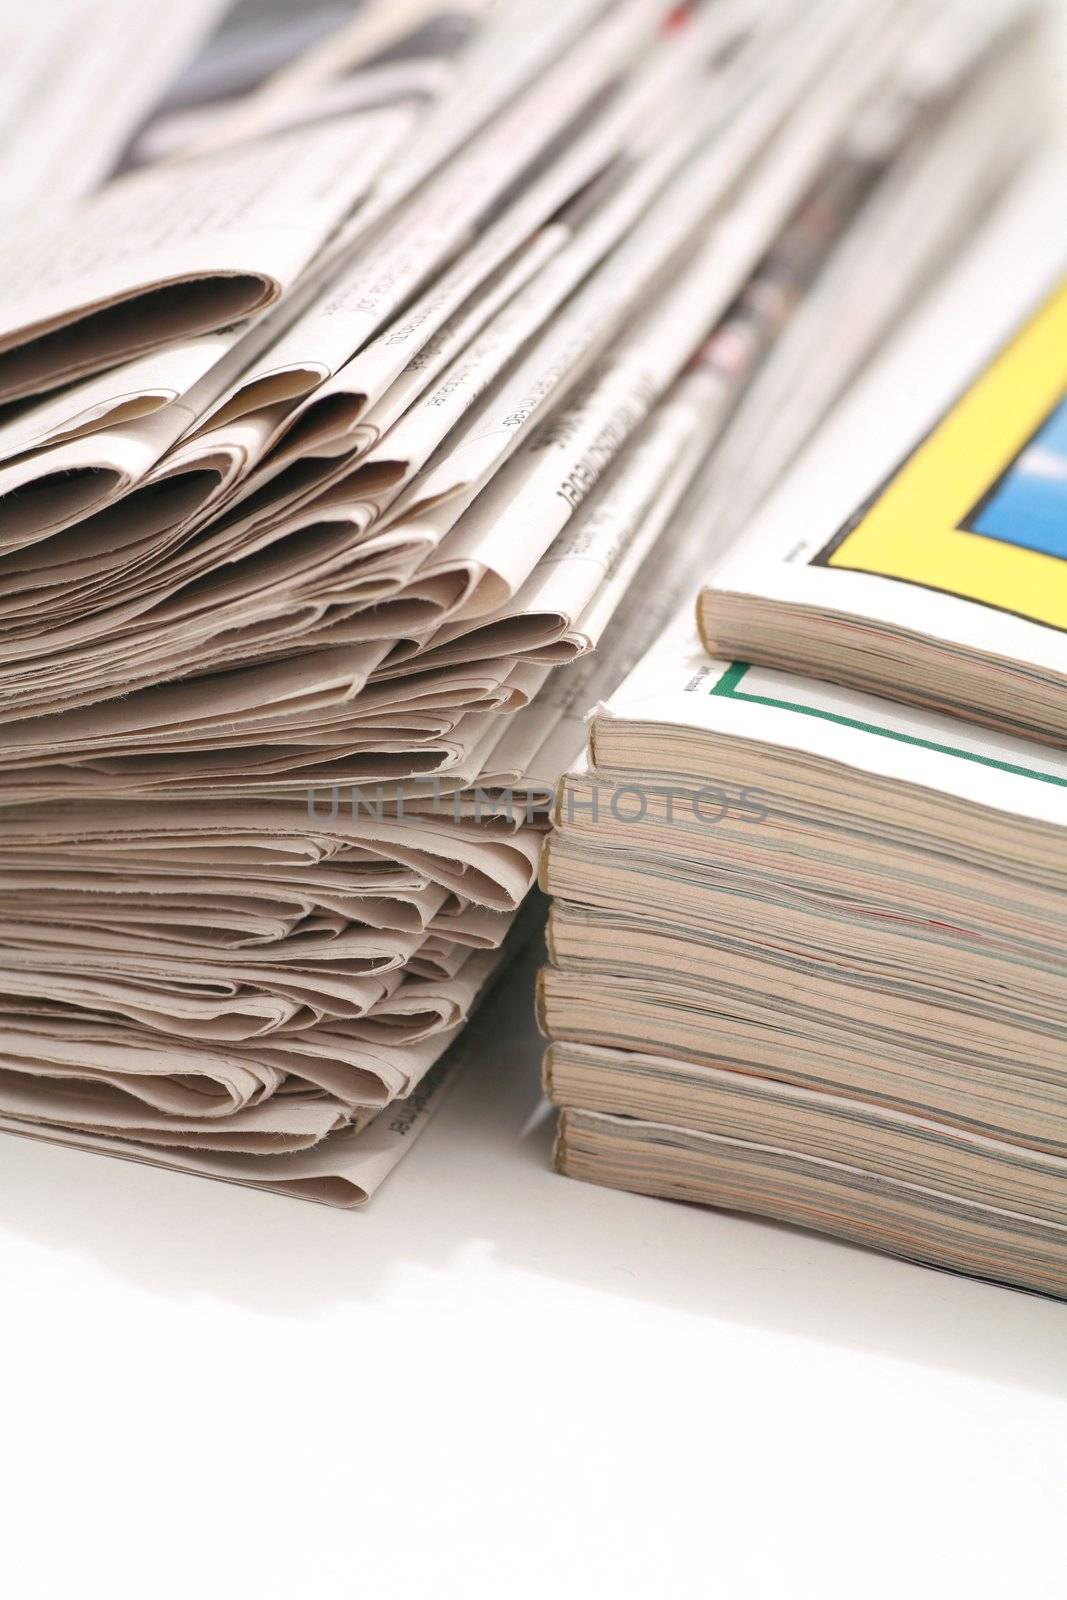 close-up of newspapers/magazine on a white backgroung.